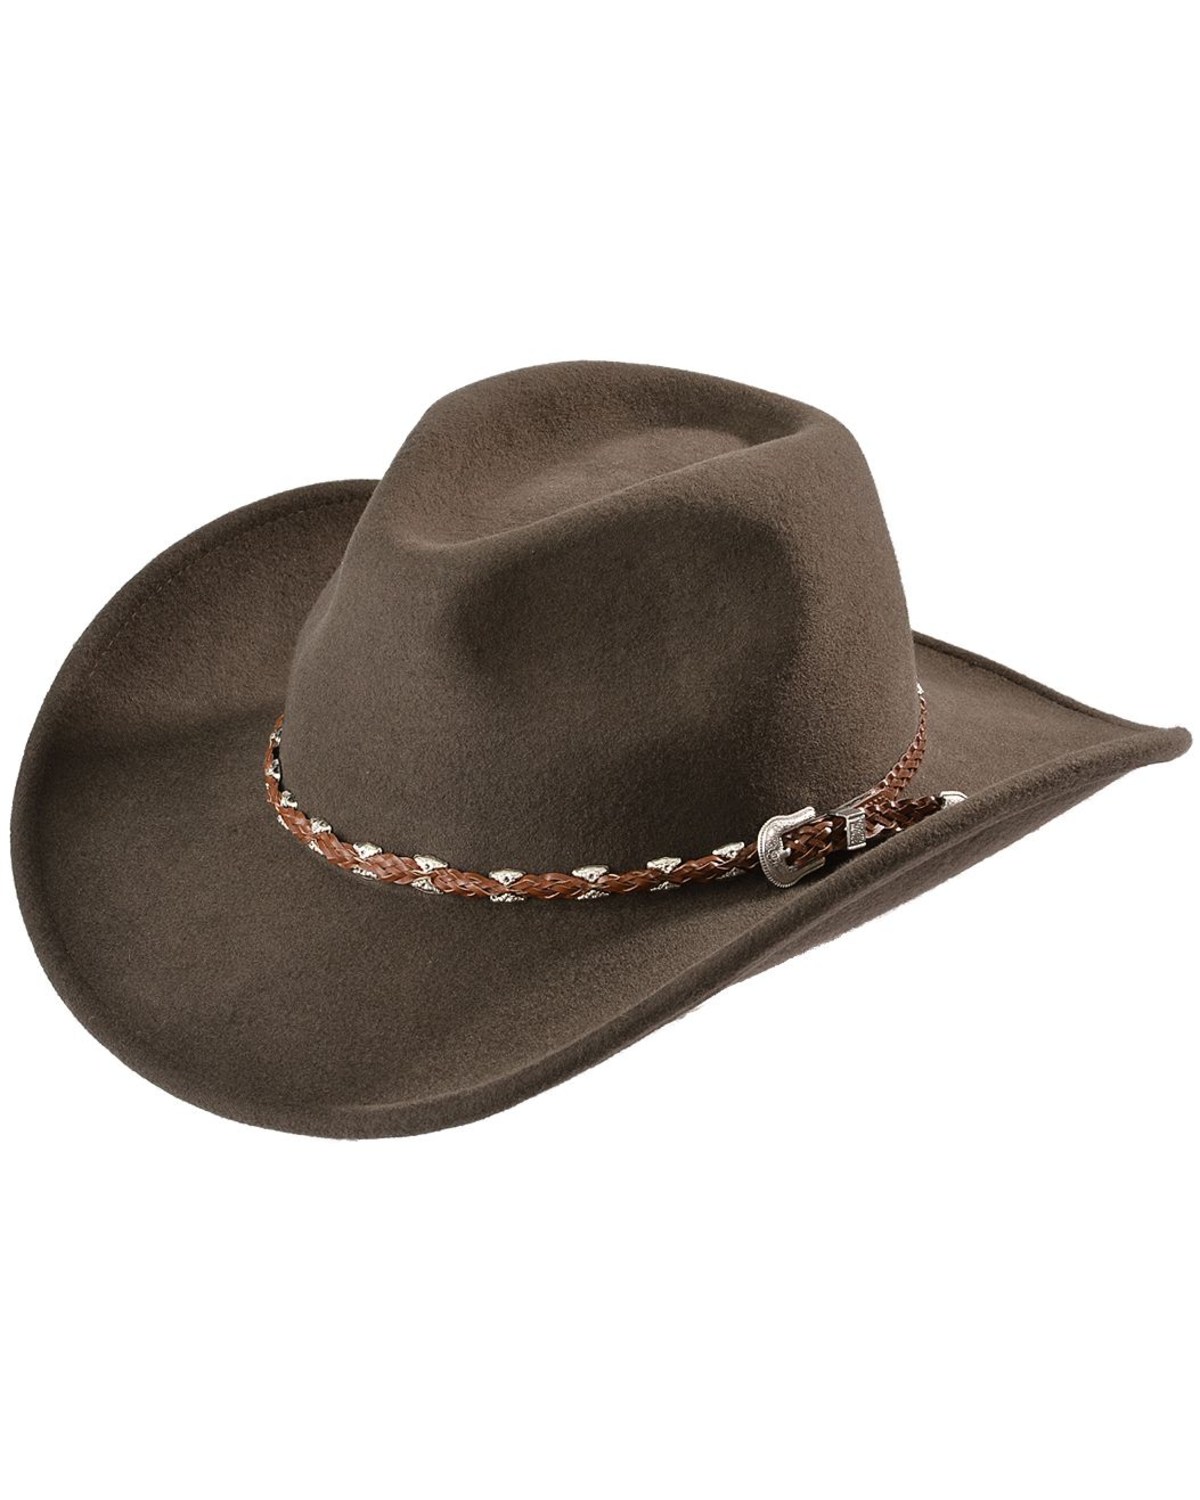 Outback Trading Co. Men's Wallaby UPF50 Sun Protection Crushable Hat